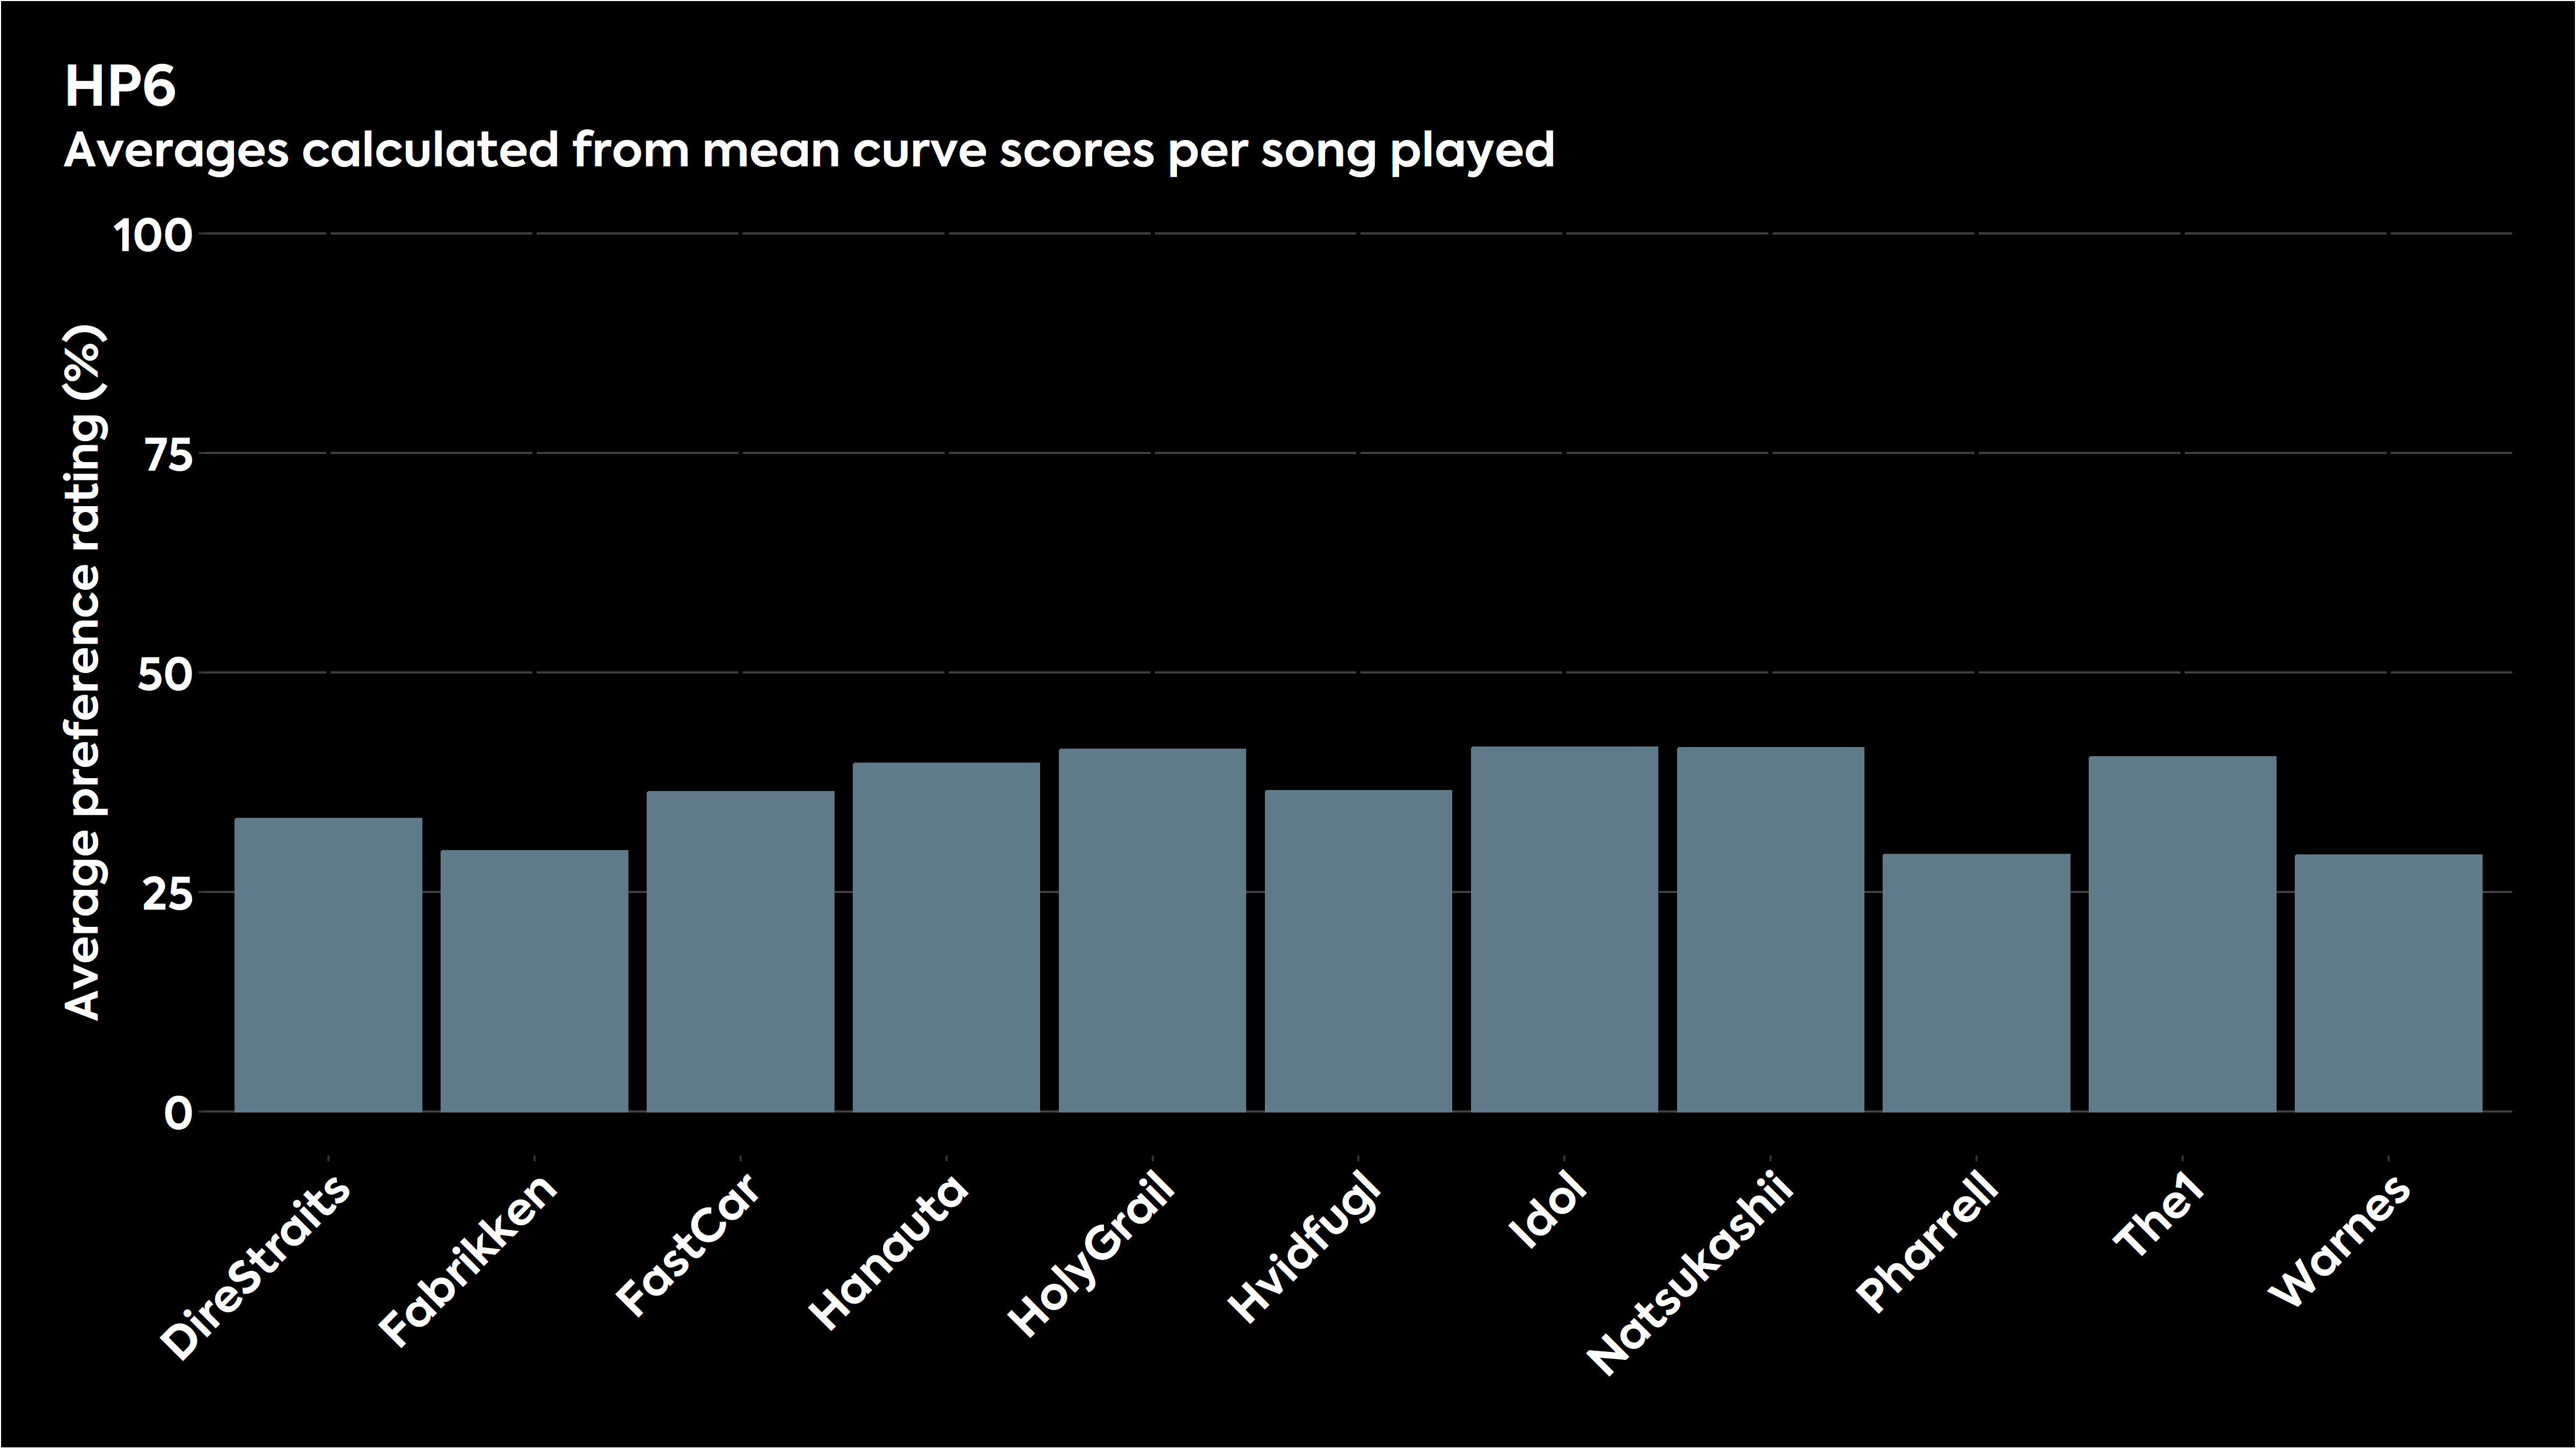 Bar chart showing how the various stimuli were judged for HP6 in listening tests.